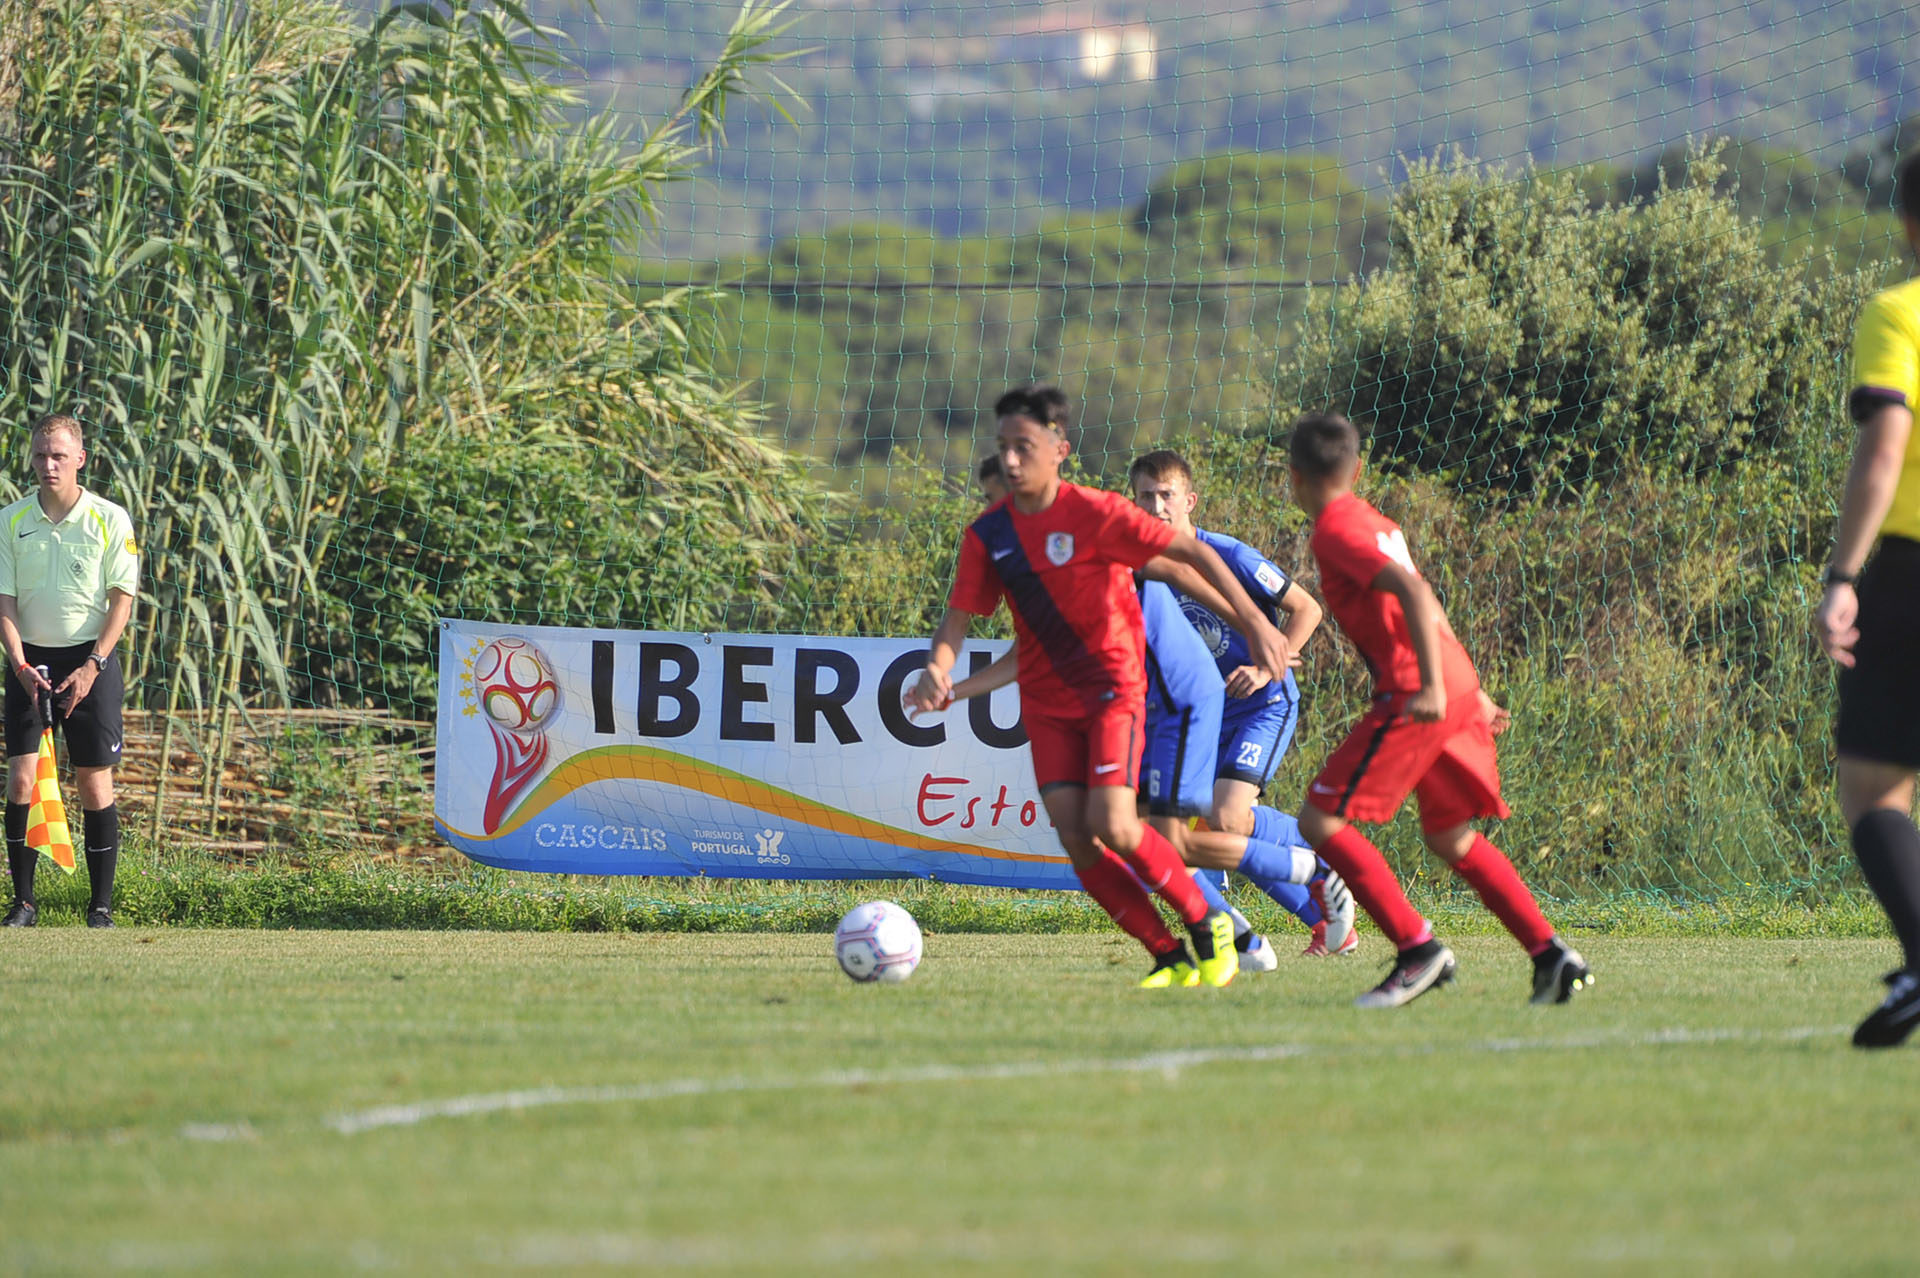 IberCup Barcelona - during the game - Road to Sport